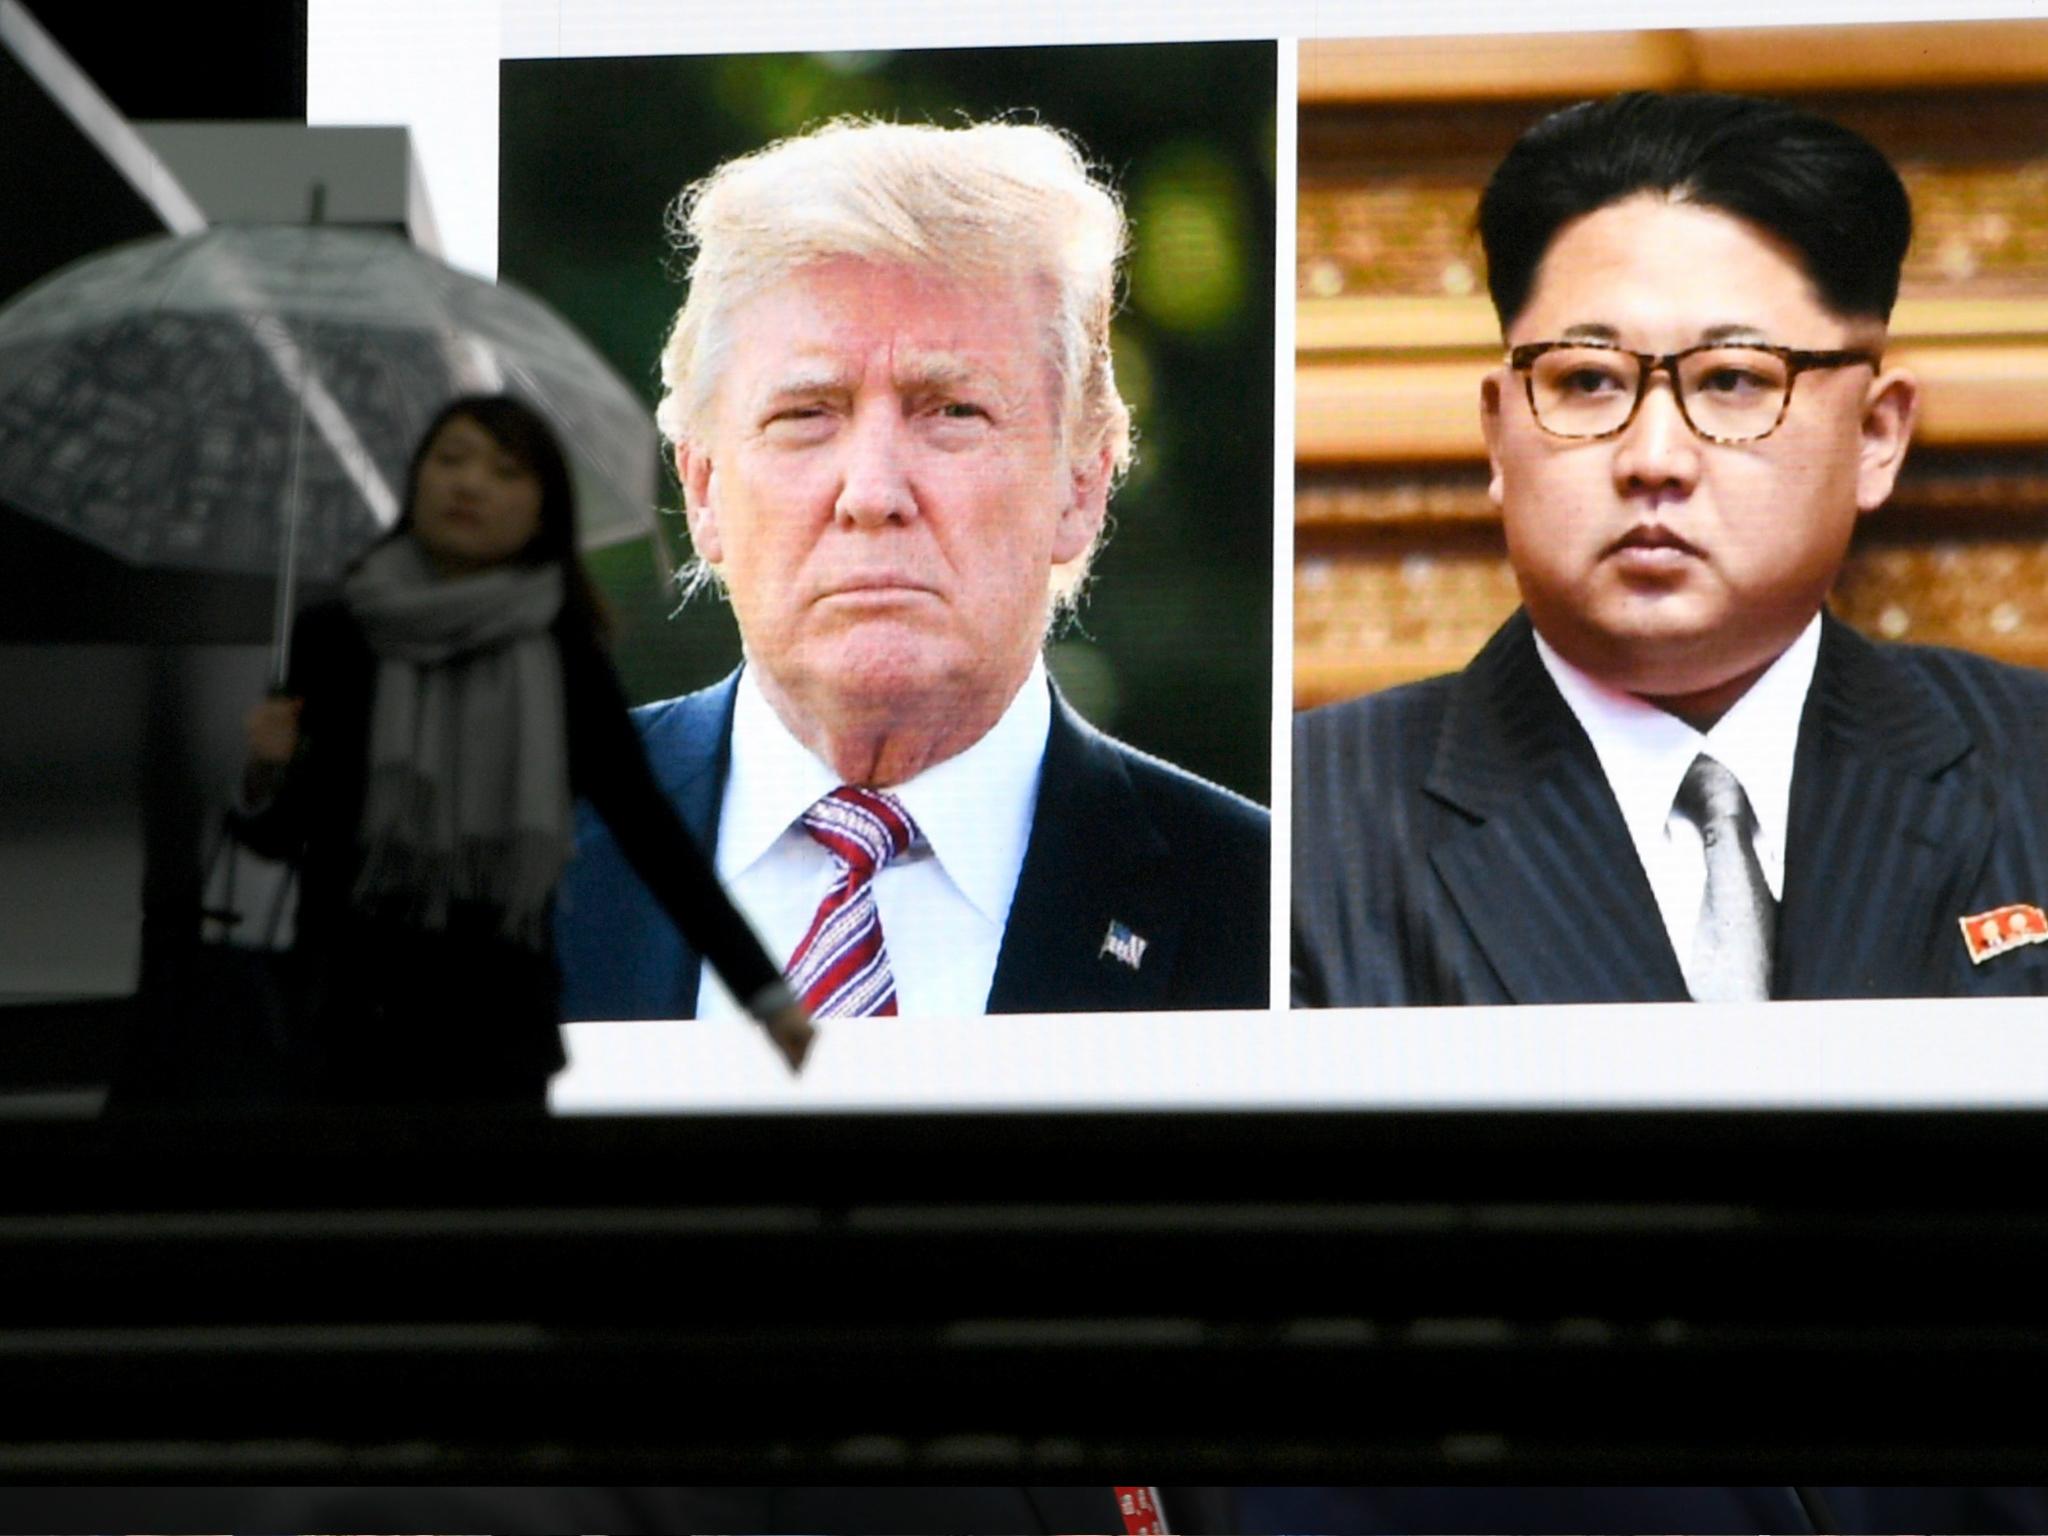 A pedestrian walks in front of a huge screen flashing a news report relating to US President Donald Trump and North Korean leader Kim Jong in Tokyo on 9 March 2018.